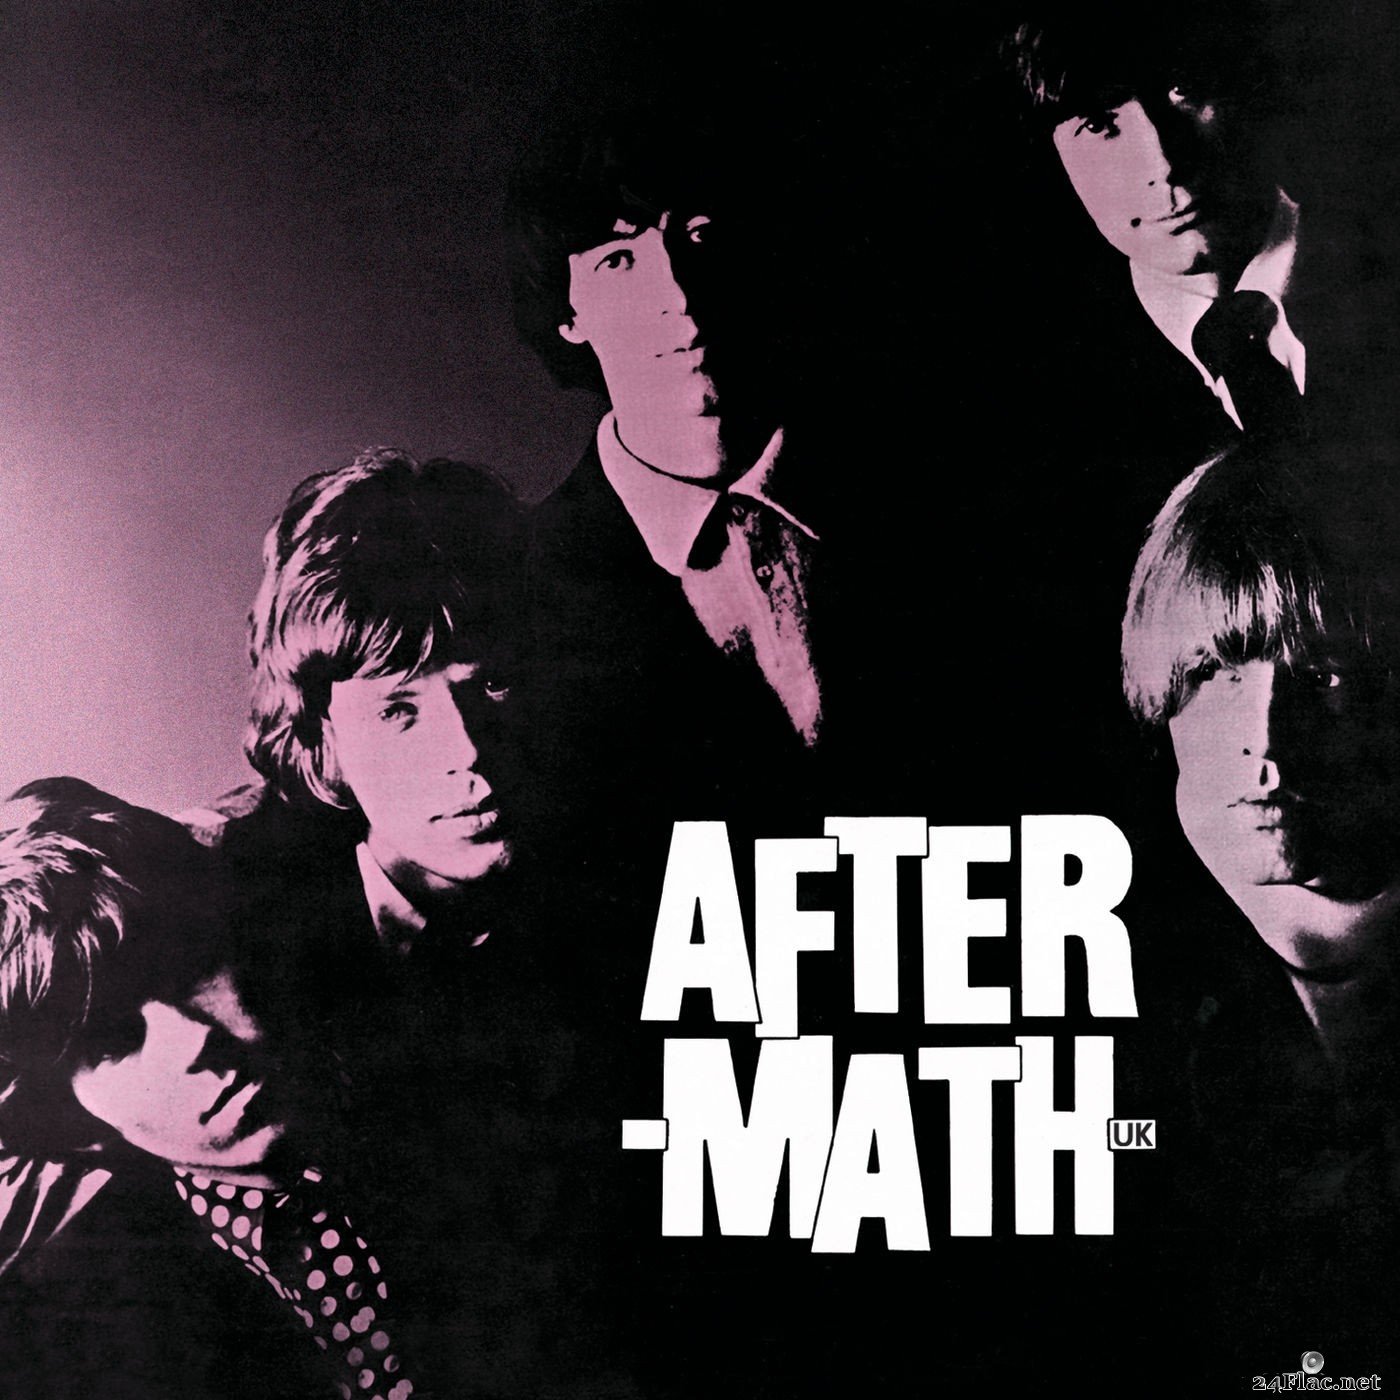 The Rolling Stones - Aftermath (Original UK Edition) (2008) FLAC + Hi-Res